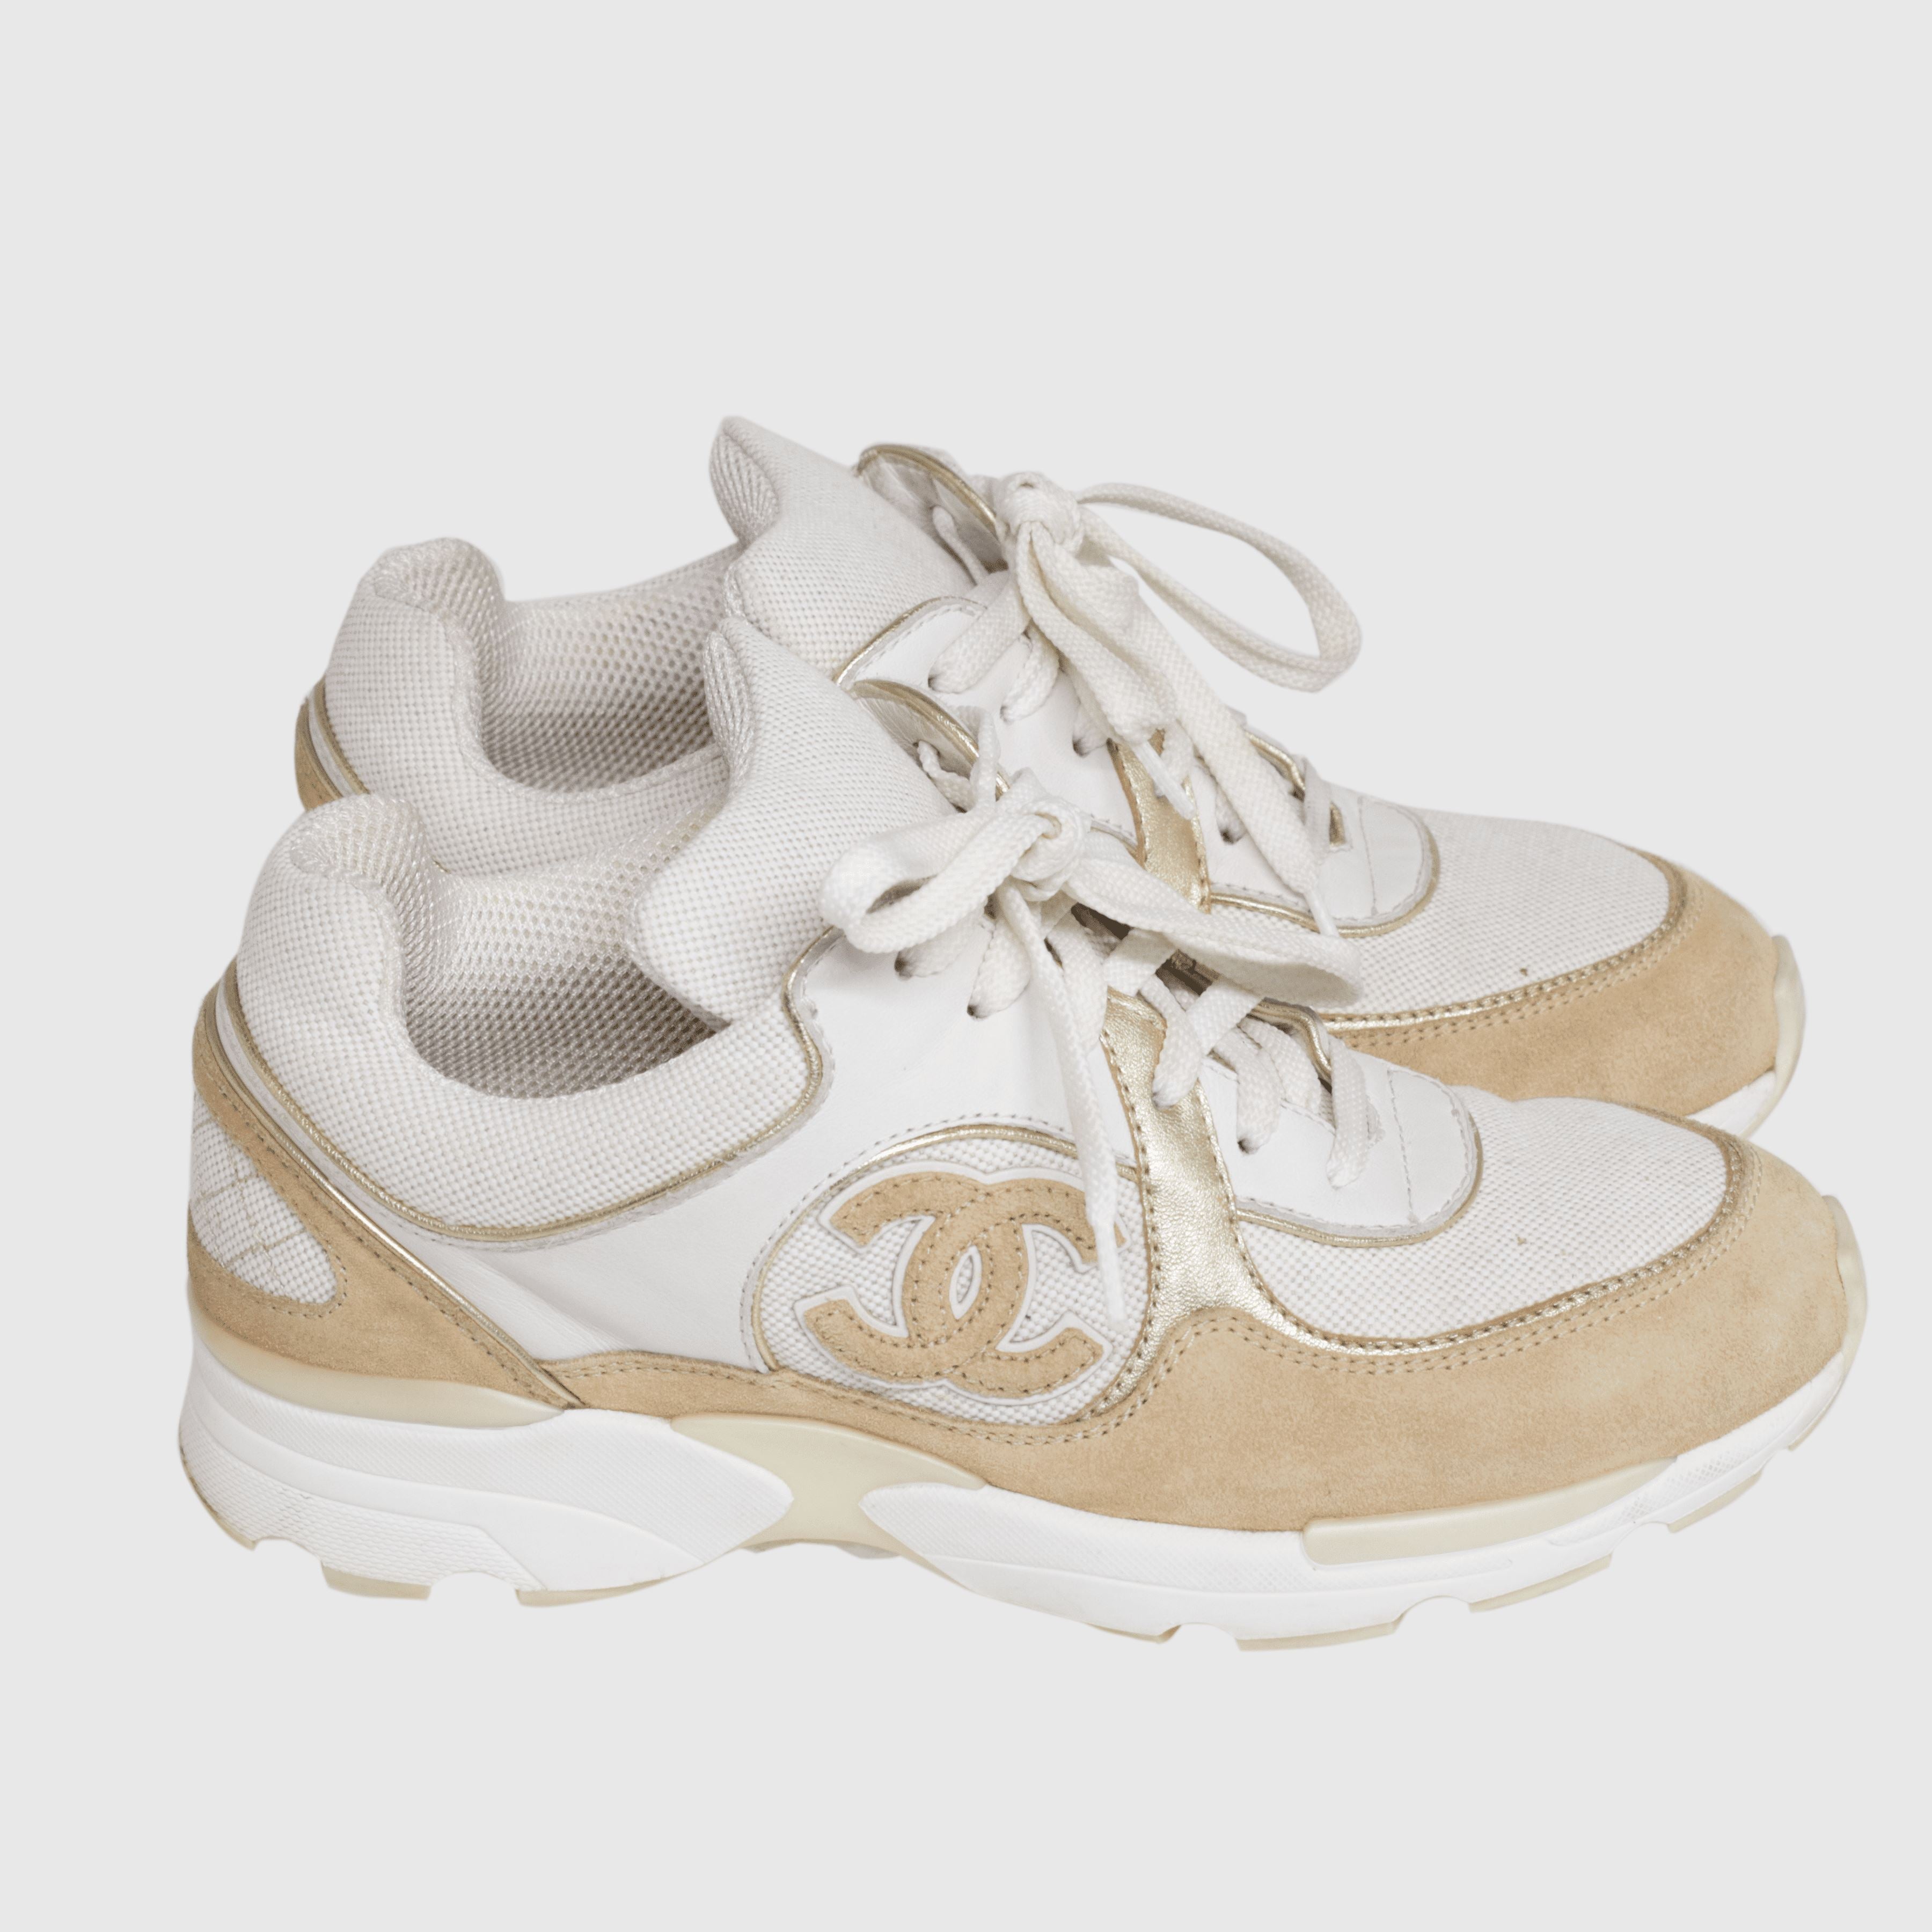 White/Beige Canvas CC Logo Lace Up Sneakers Shoes Chanel 